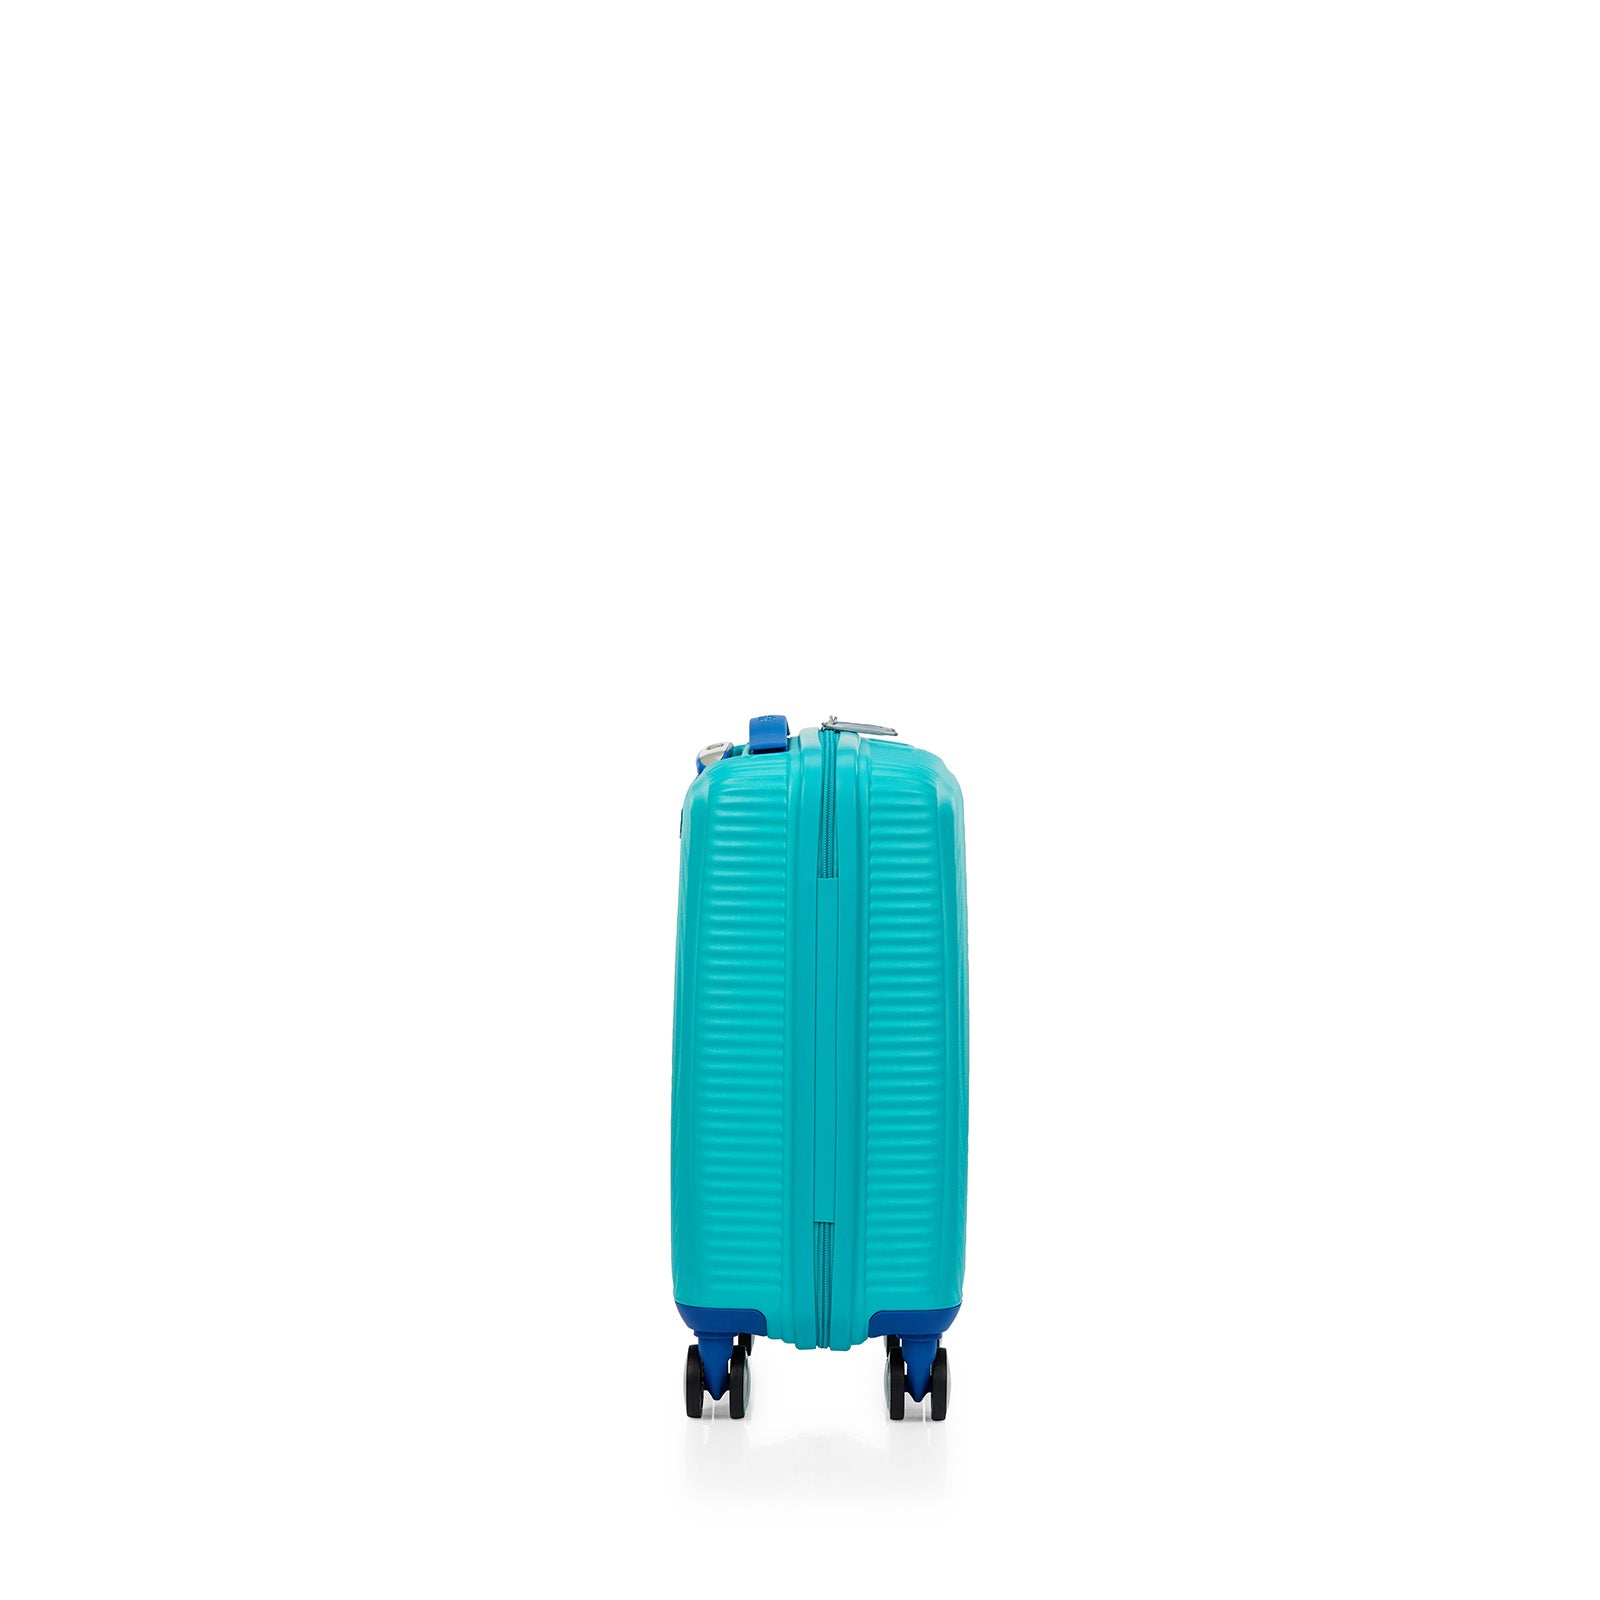 American-Tourister-Little-Curio-47cm-Carry-On-Suitcase-Teal-Blue-Side-1